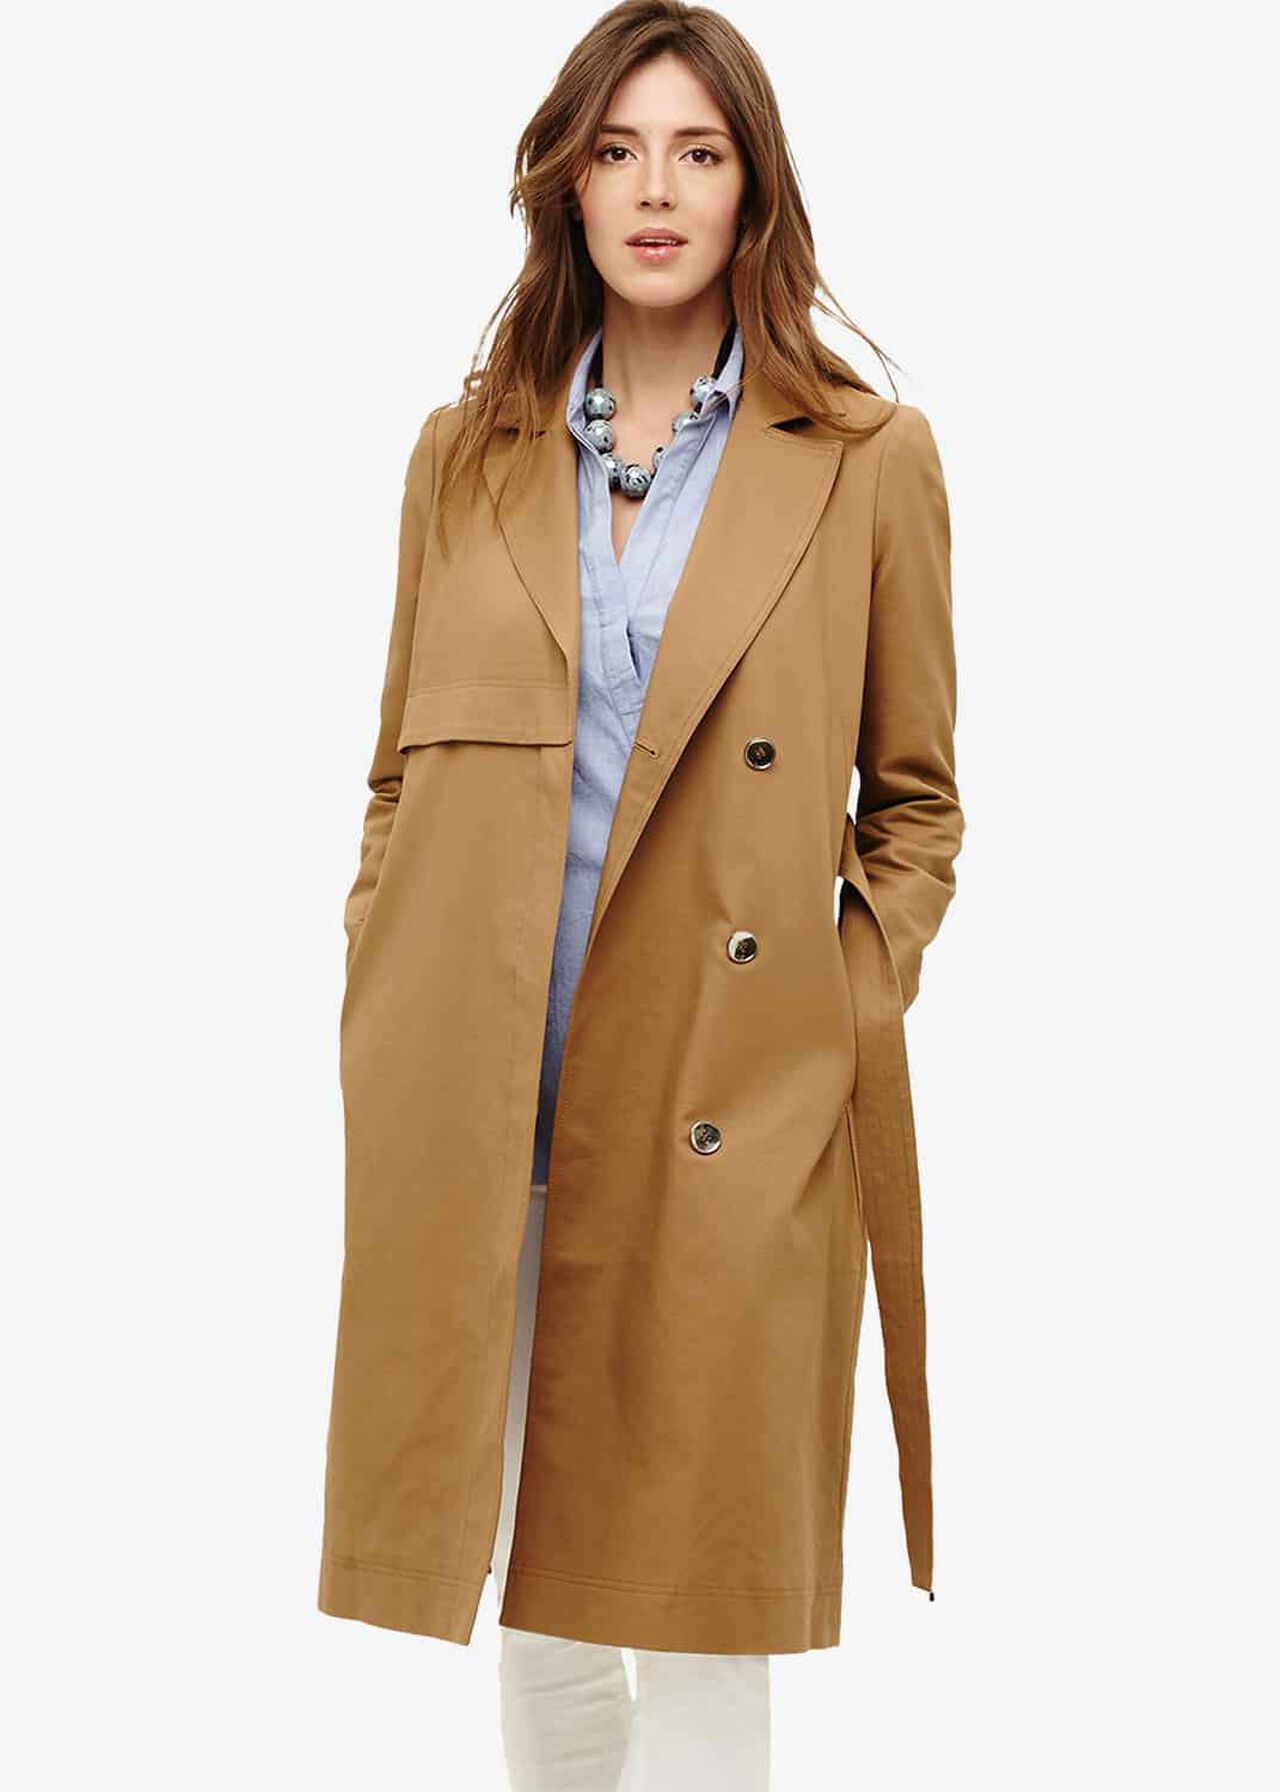 Tayte Belted Trench Coat | Phase Eight